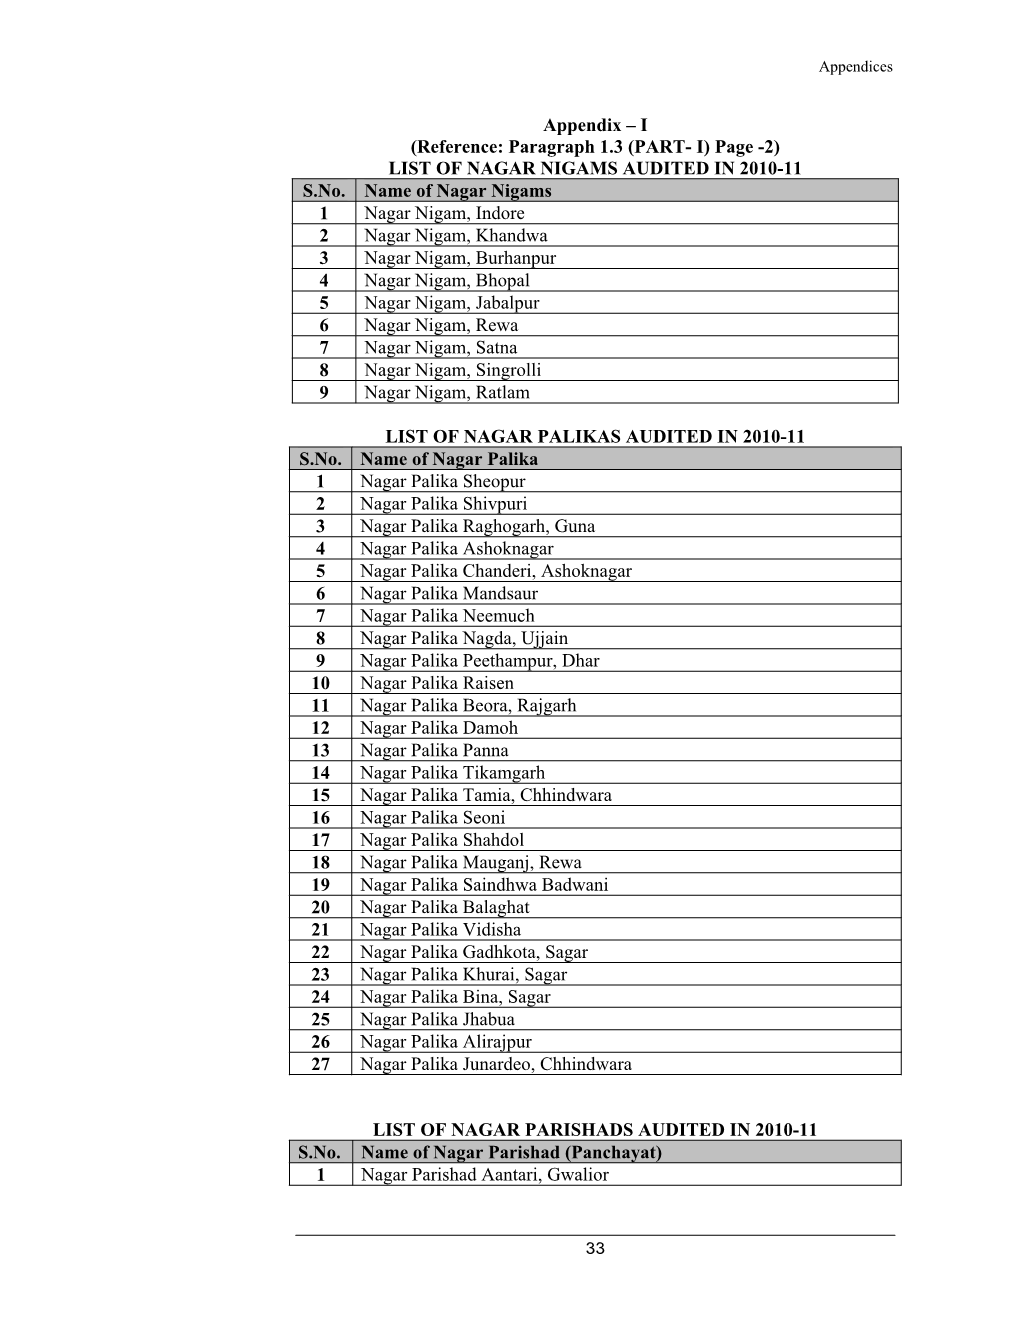 Appendix – I (Reference: Paragraph 1.3 (PART- I) Page -2) LIST of NAGAR NIGAMS AUDITED in 2010-11 S.No